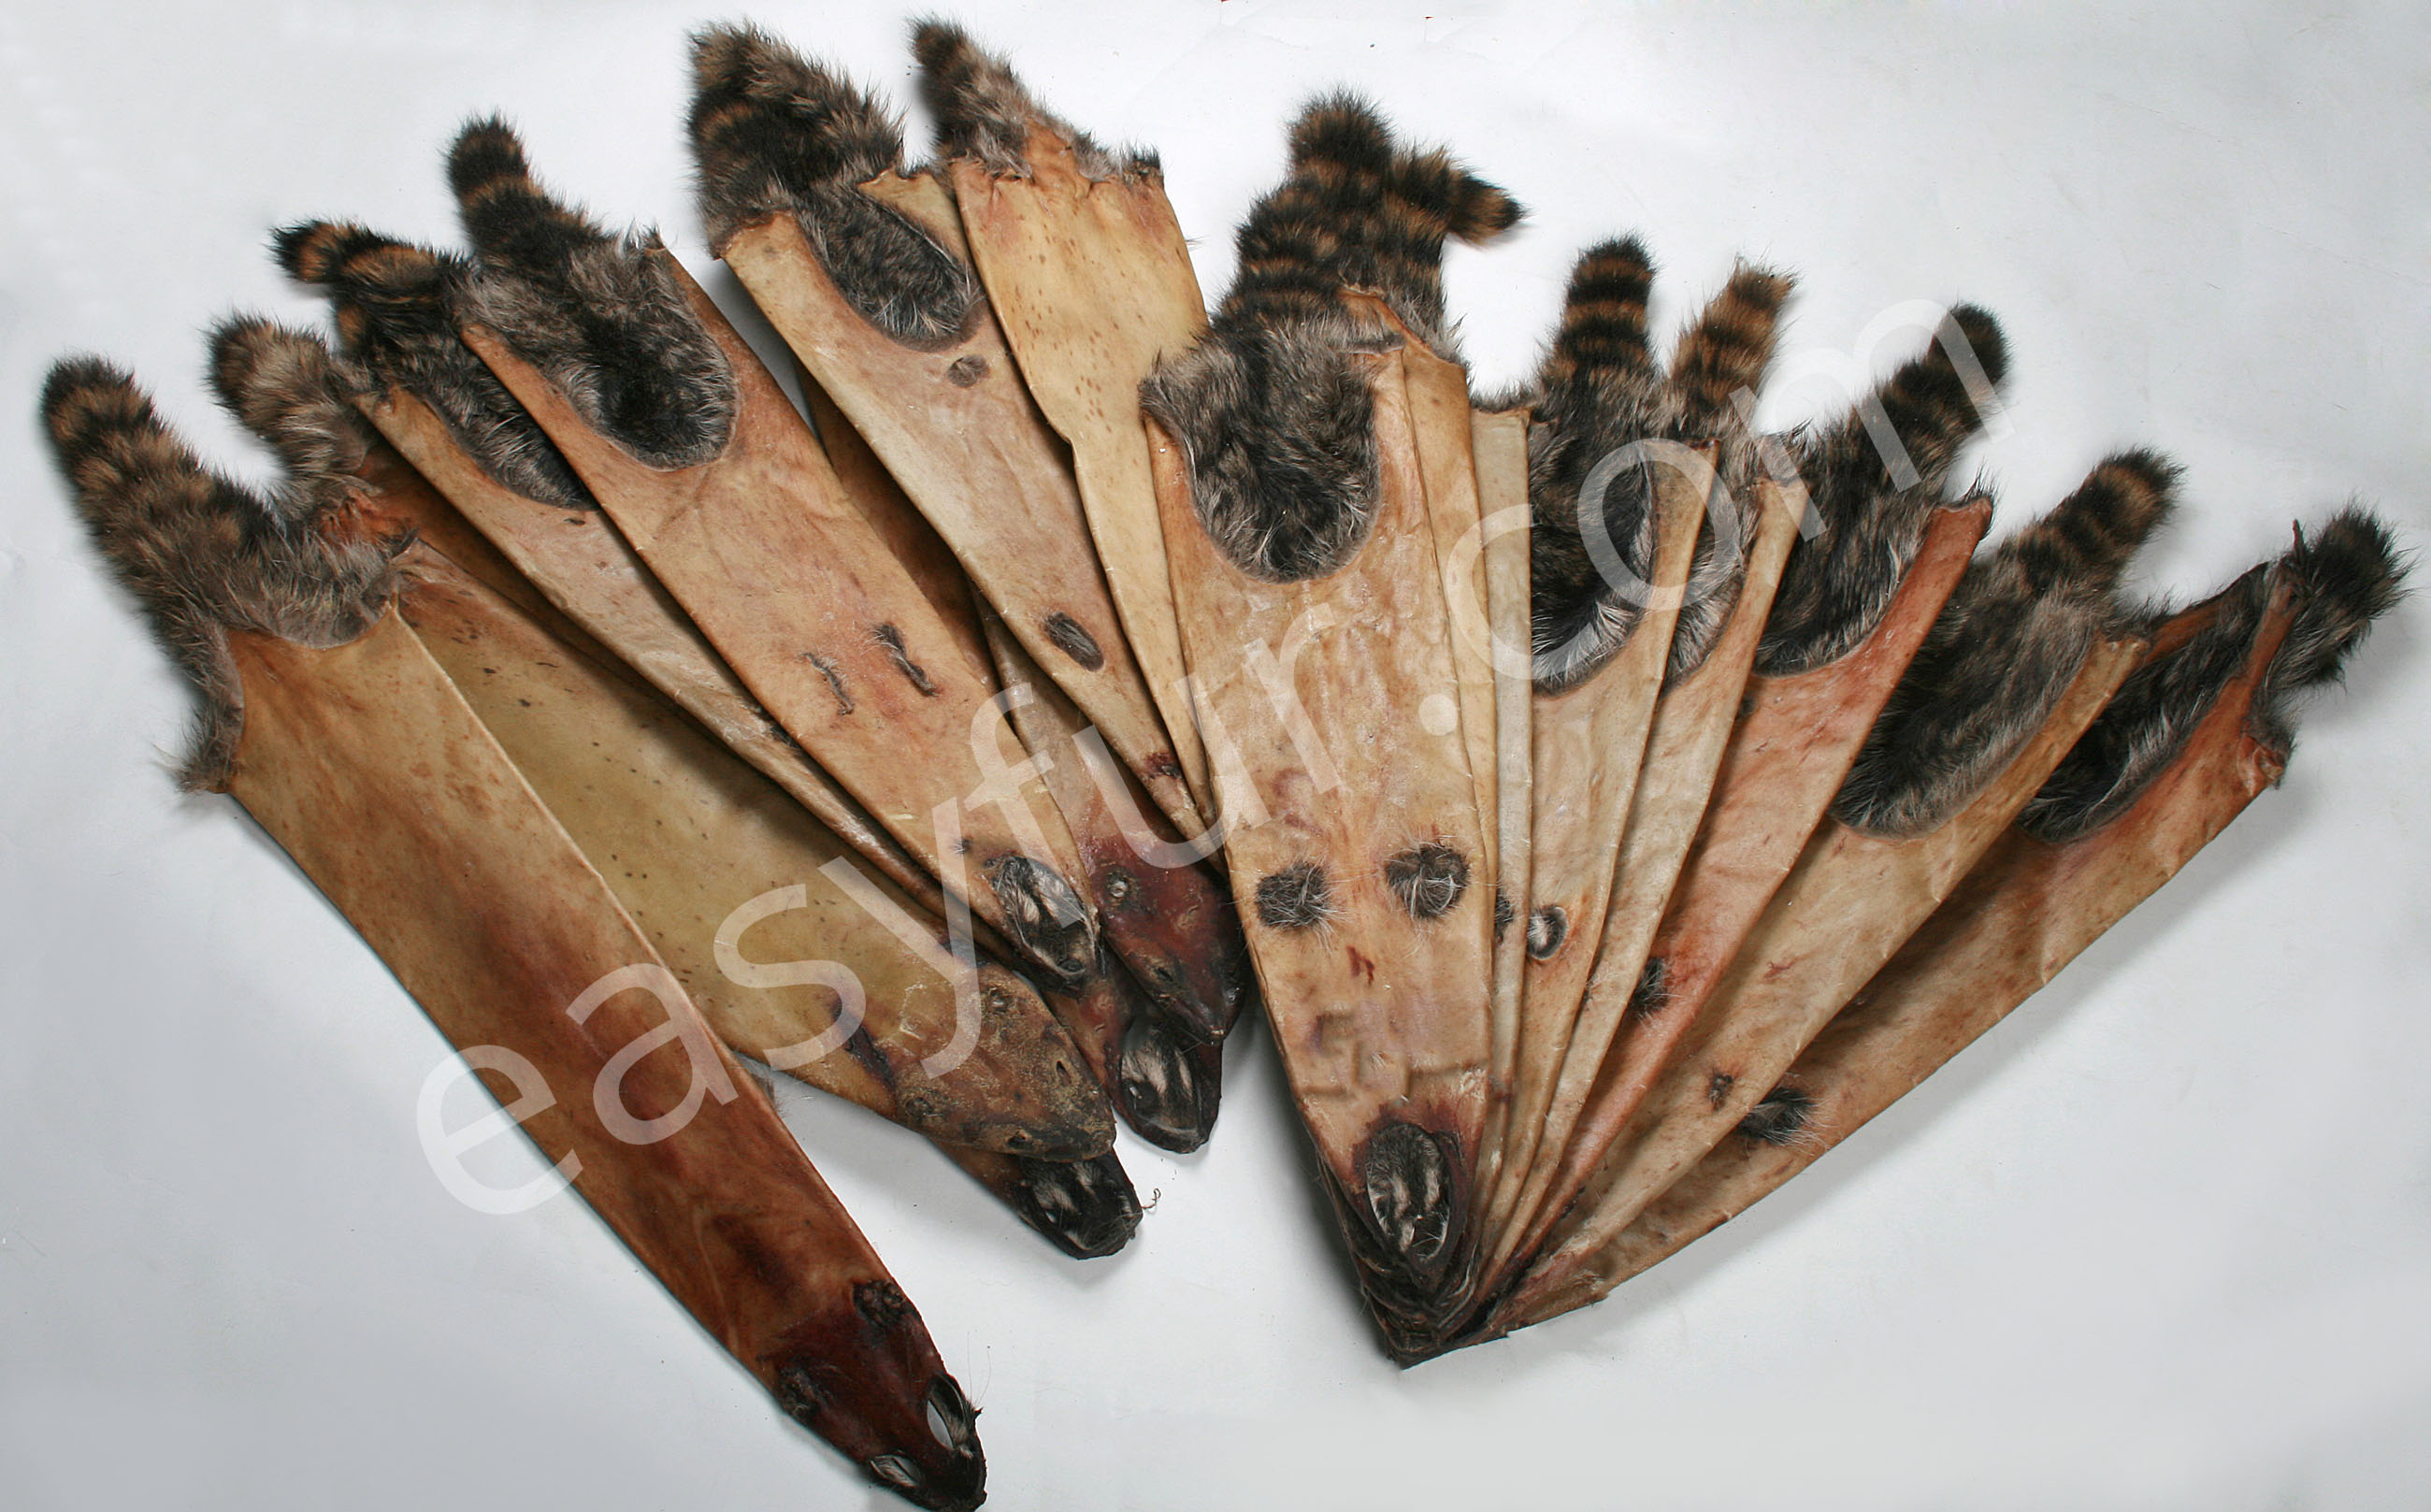 Raw Skins from Canadian Raccoons (Fur Harvesters)